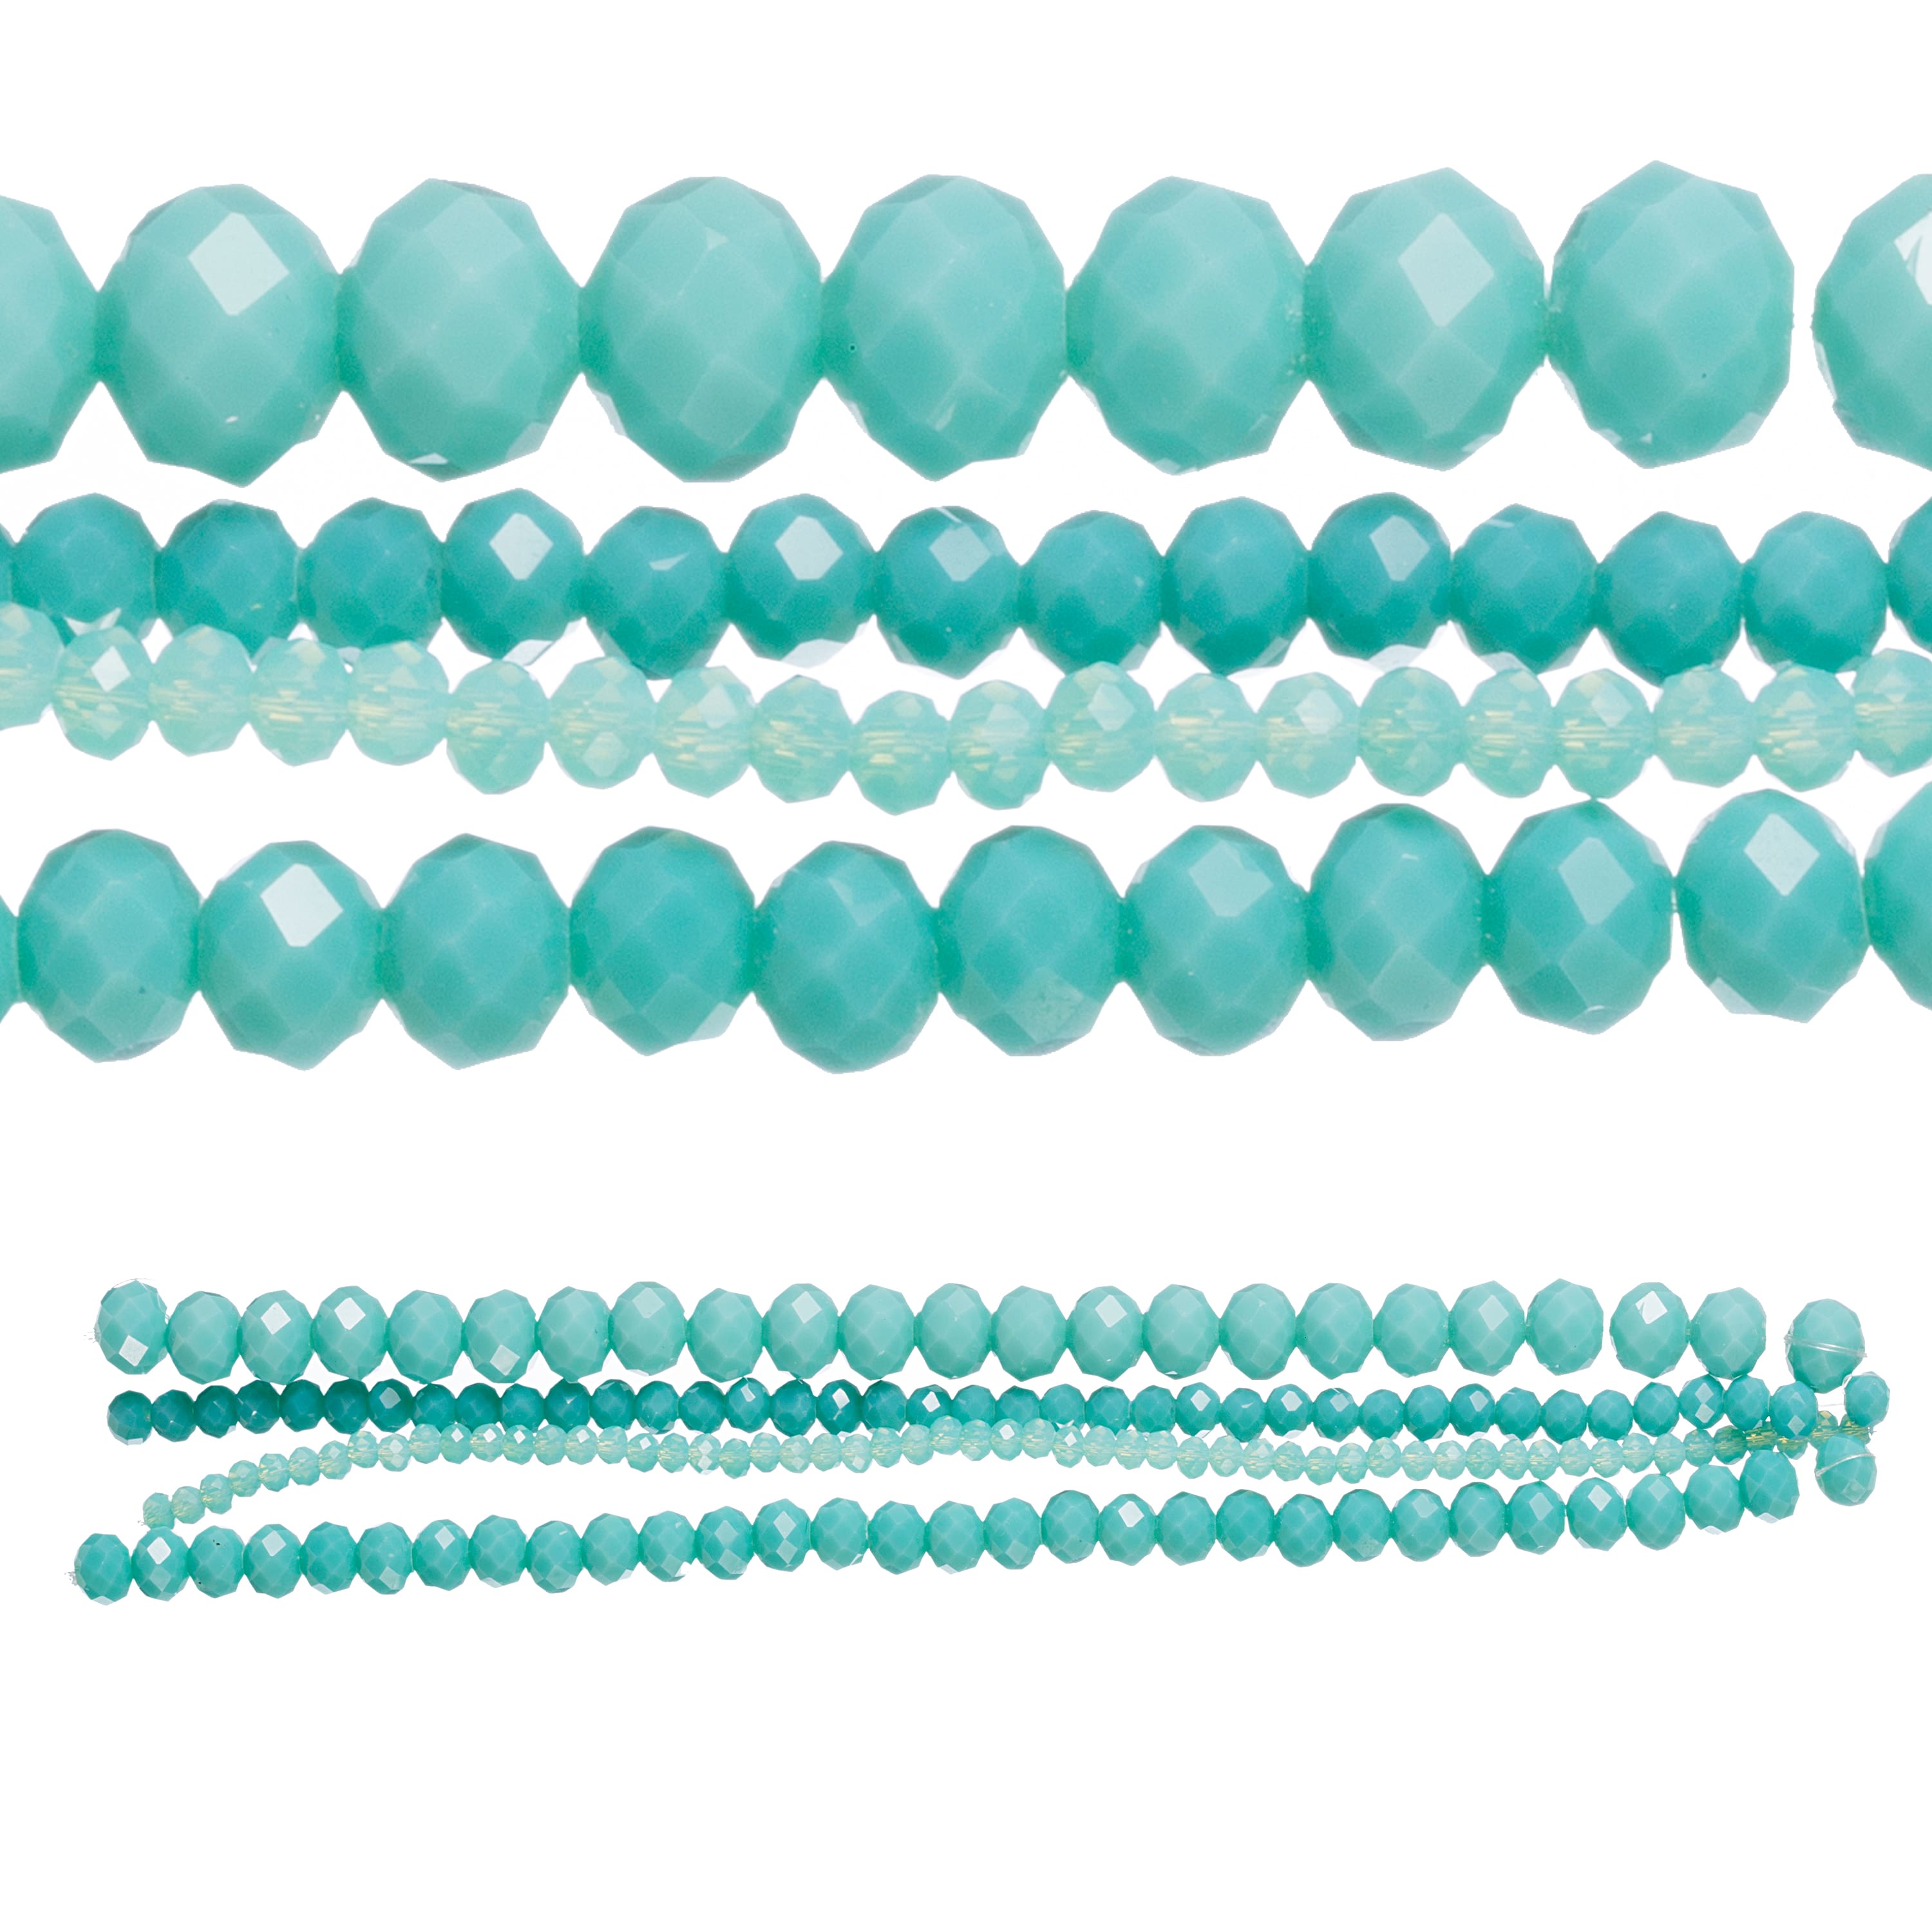 4 6 8 10mm Beautiful Faceted Rondelle Glass Crystal Beads In Strings 8 Colours 